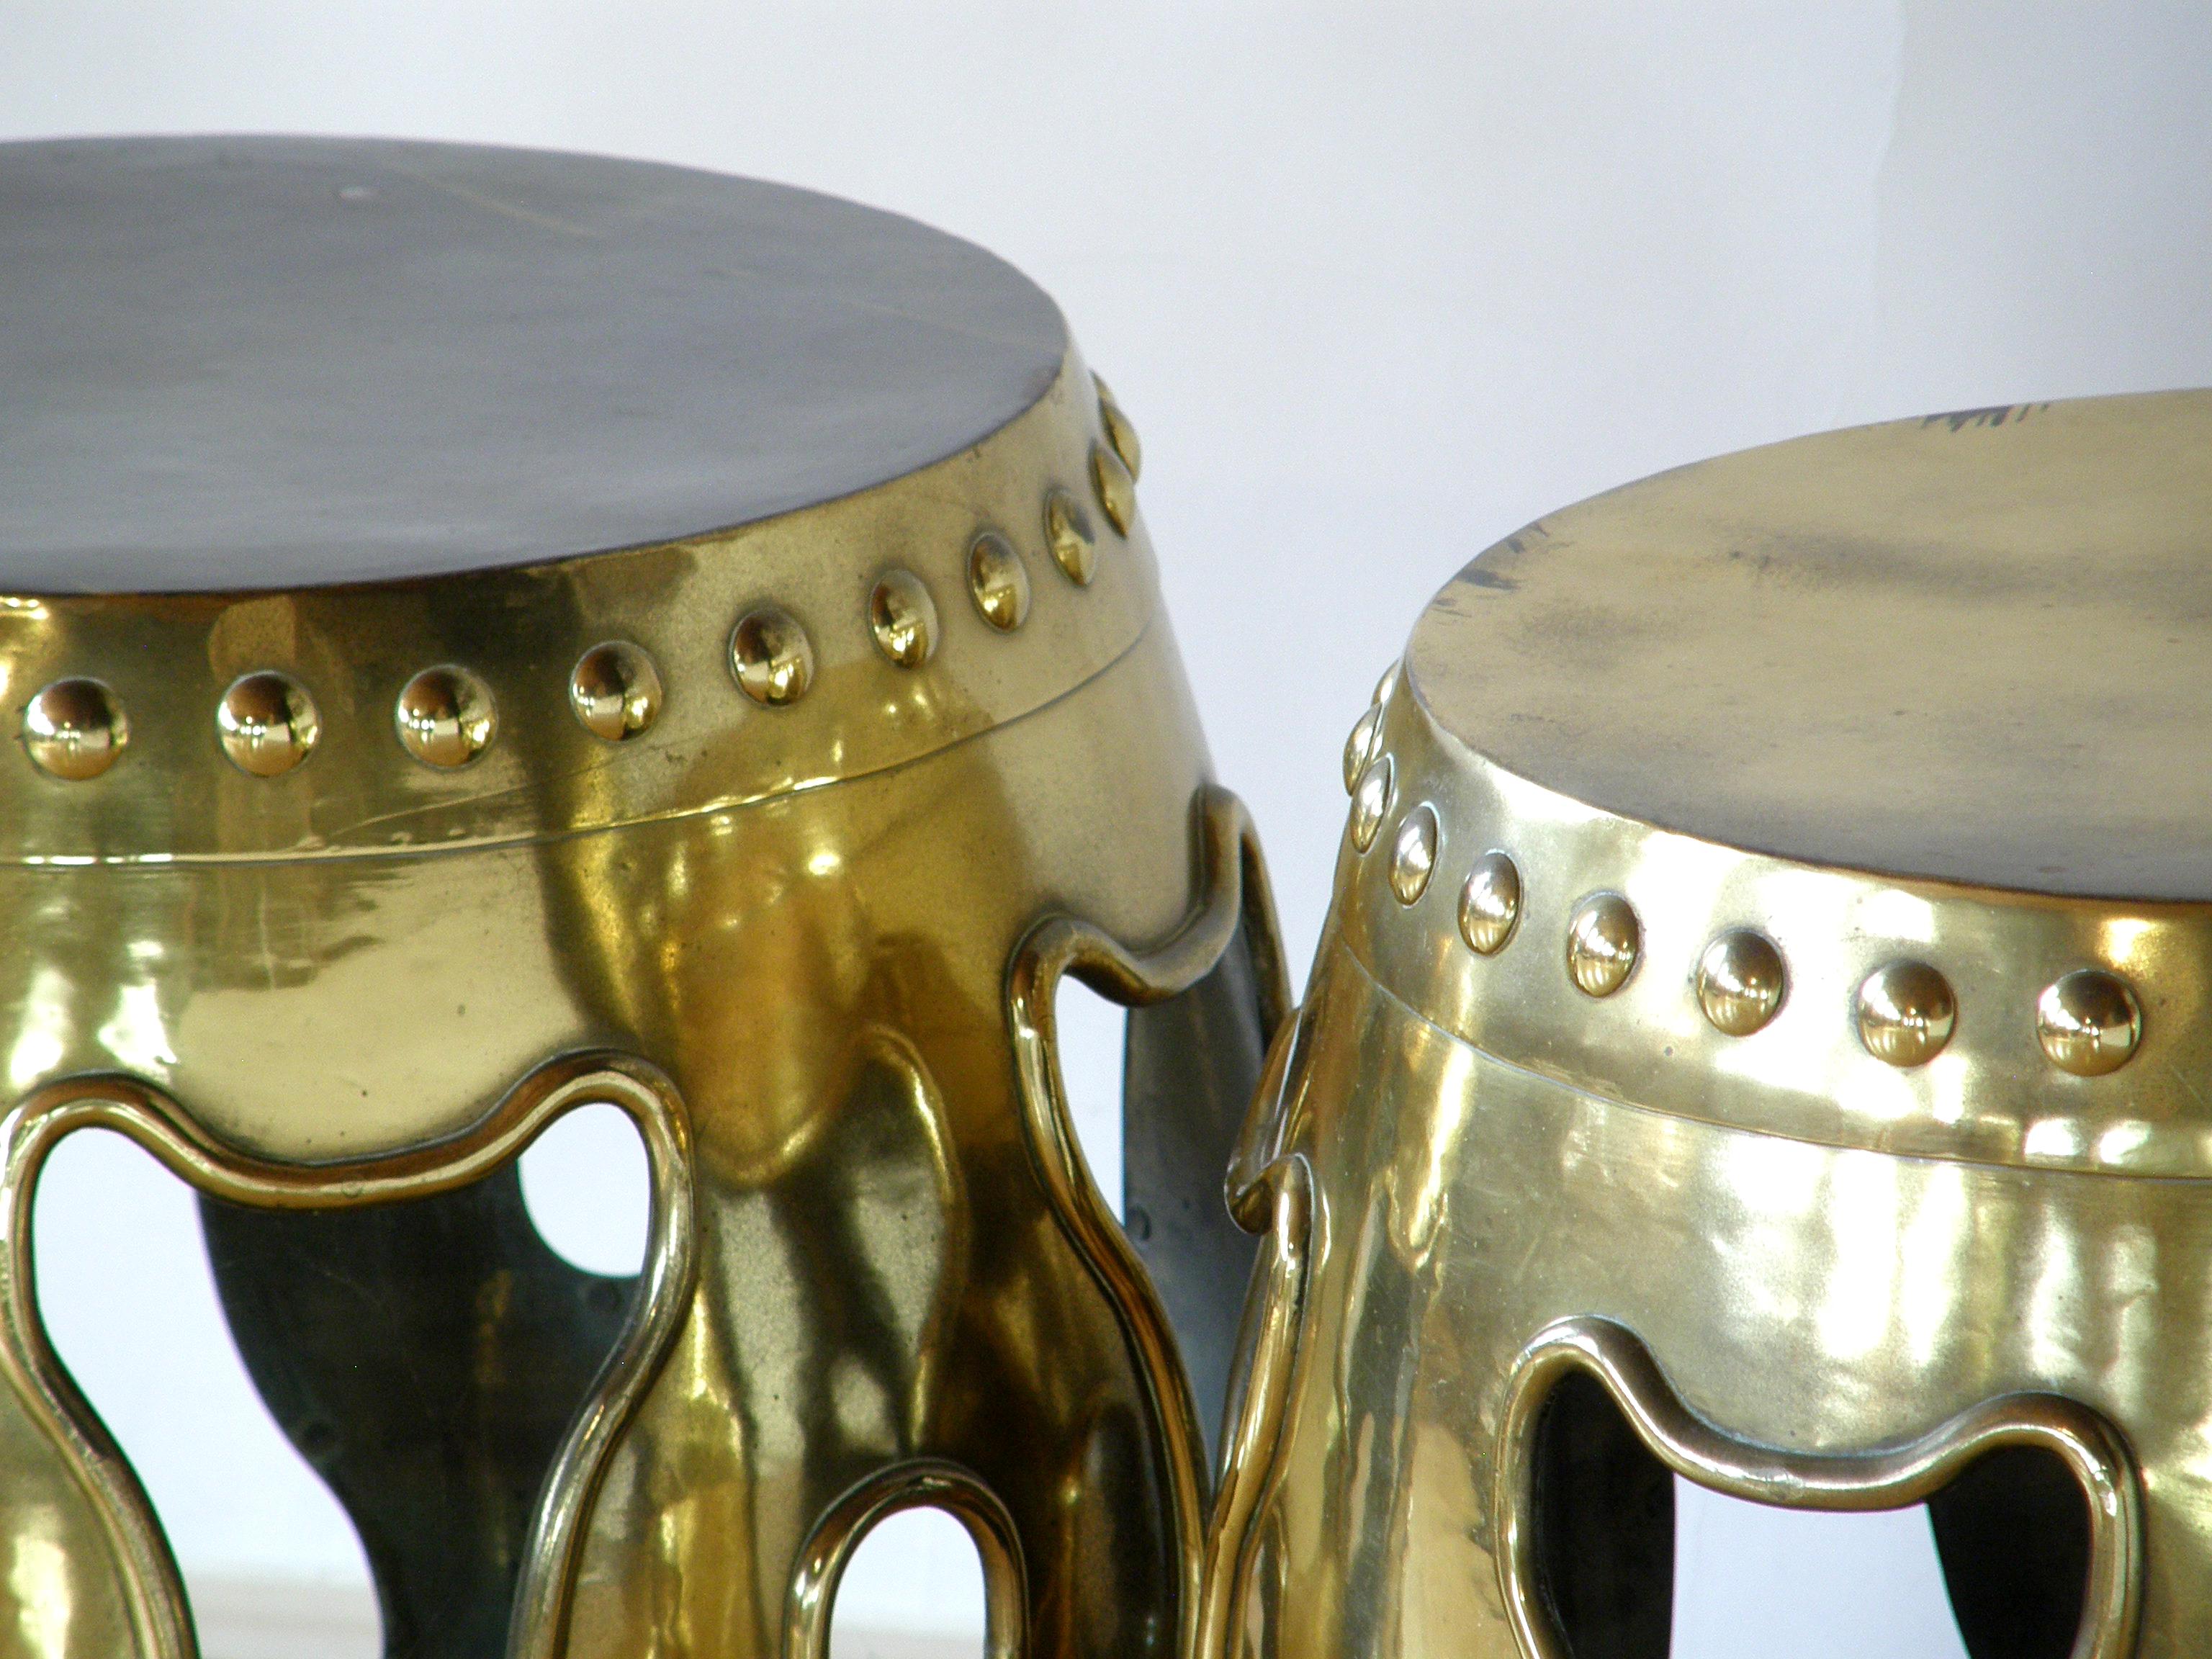 Mid-20th Century Pair of Brass Drum Garden Stools Chinese Style Design with Pierced Sides